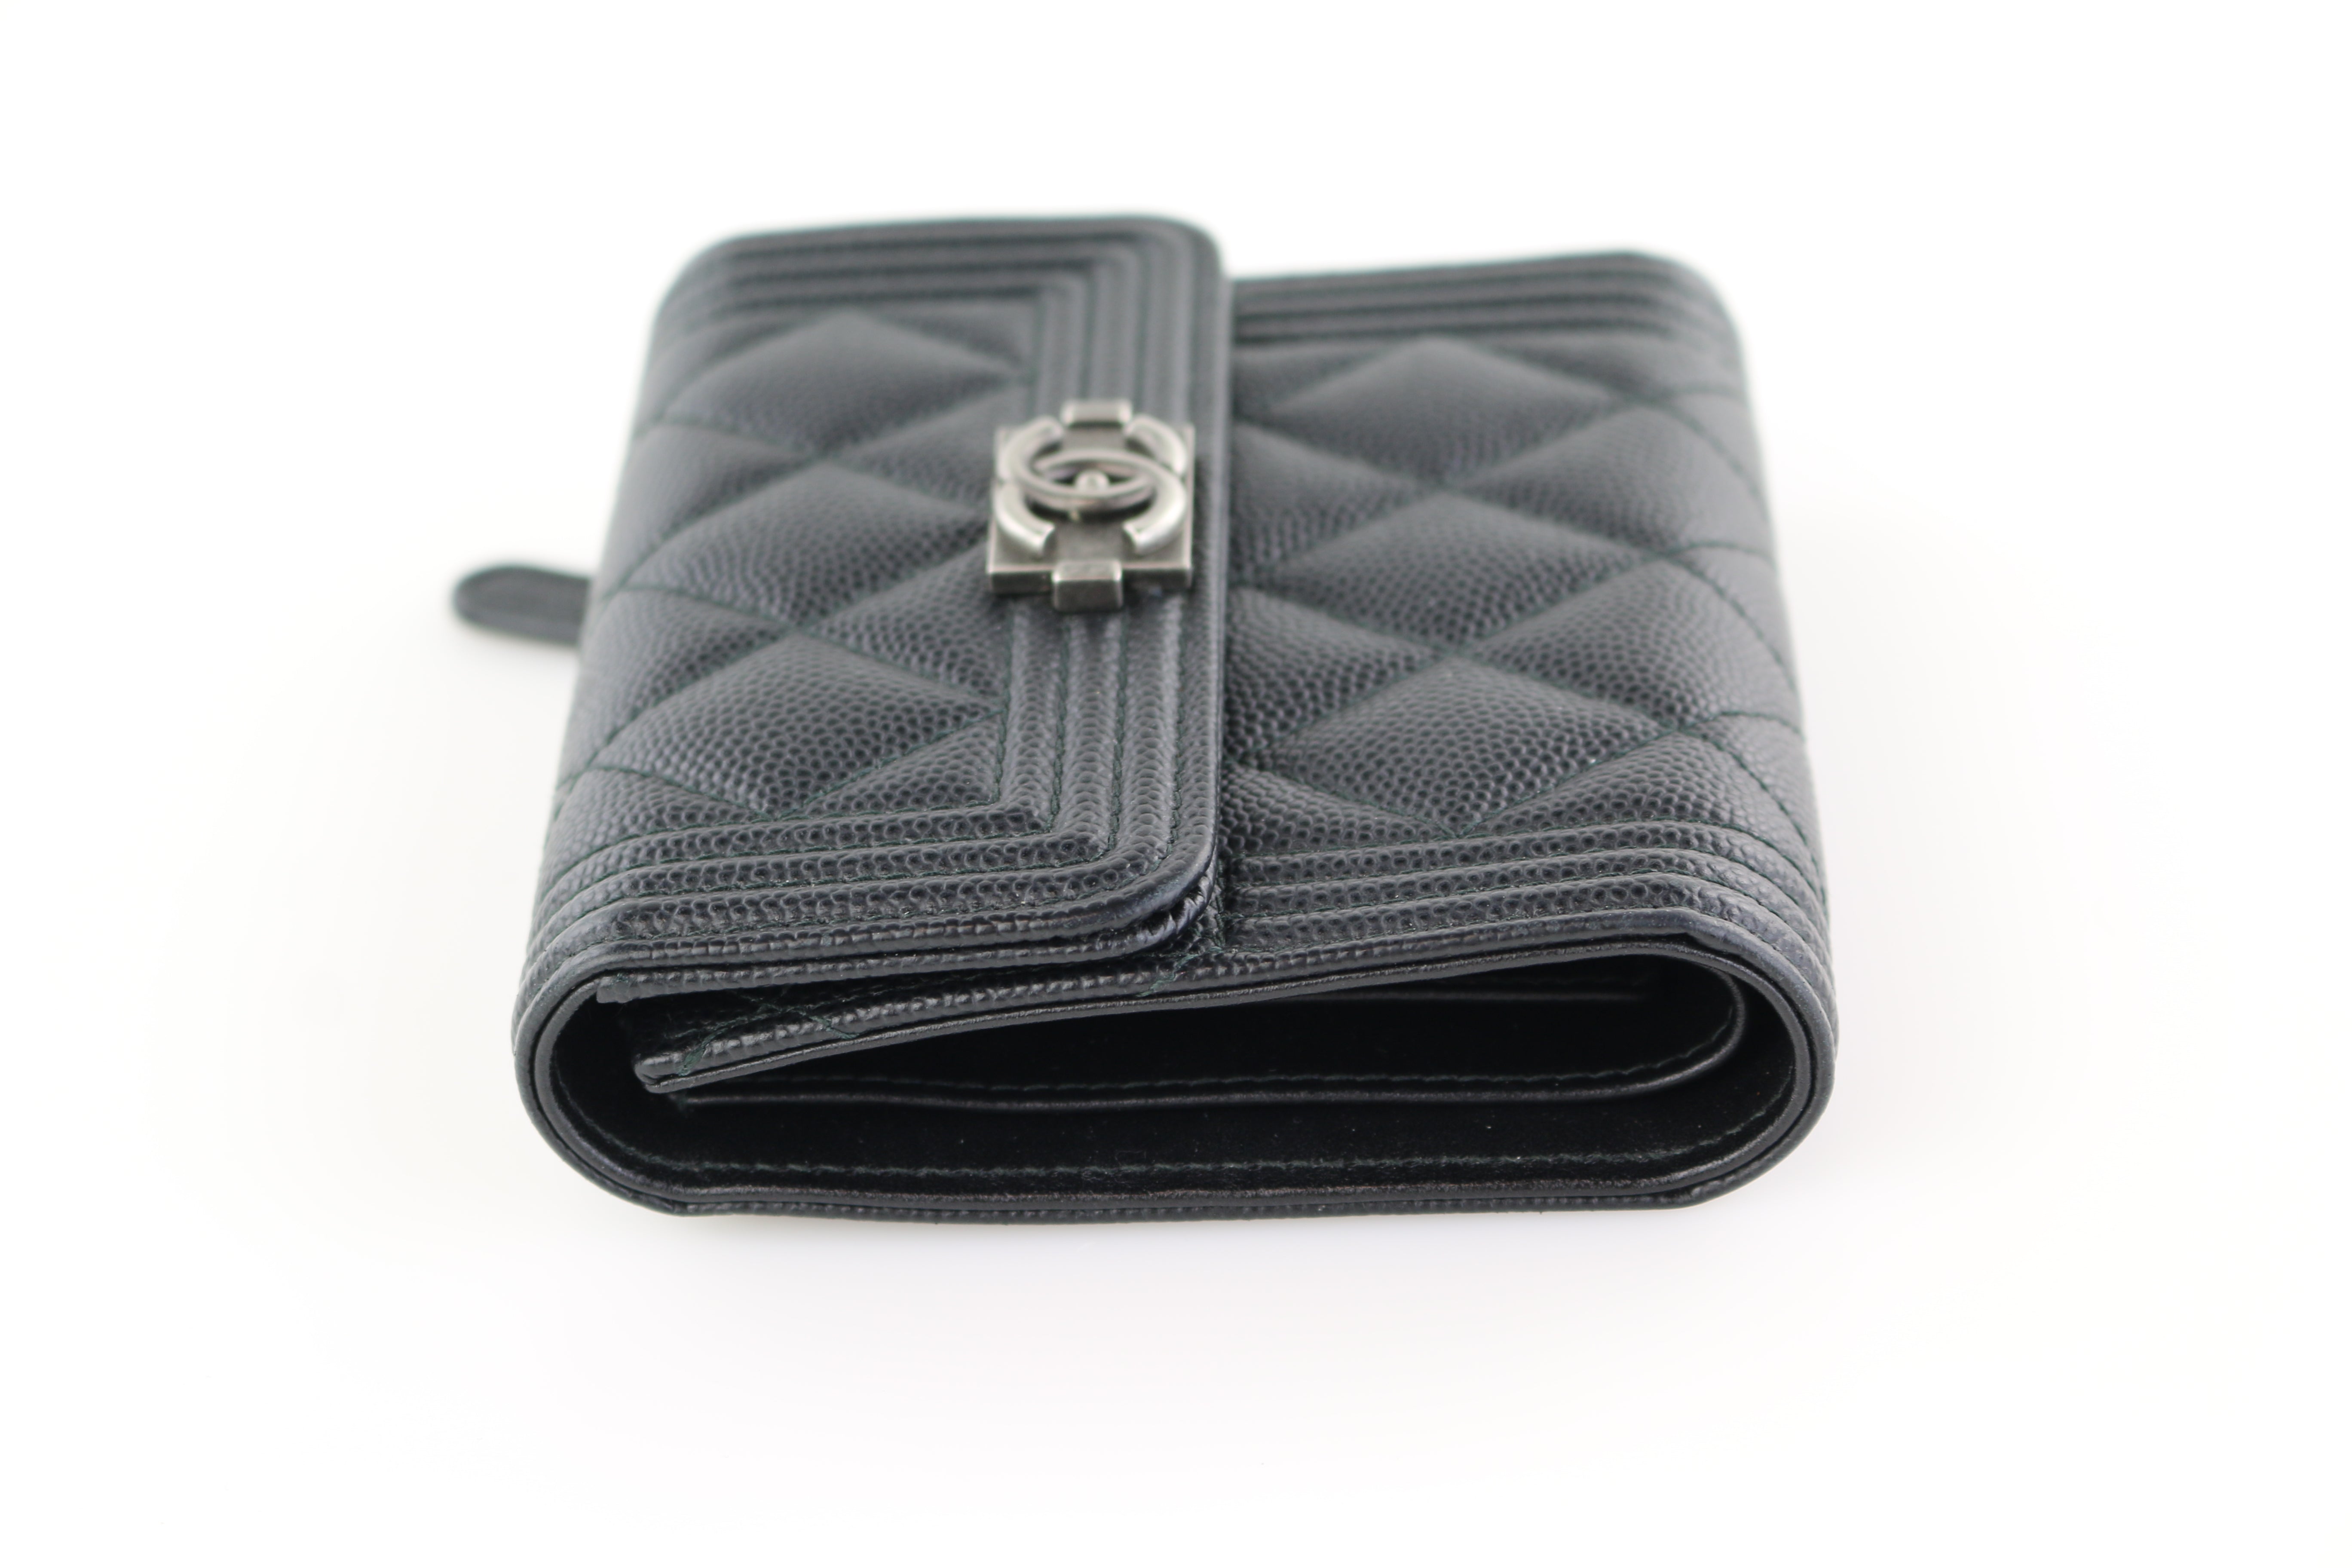 Chanel Leather Wallet In Black